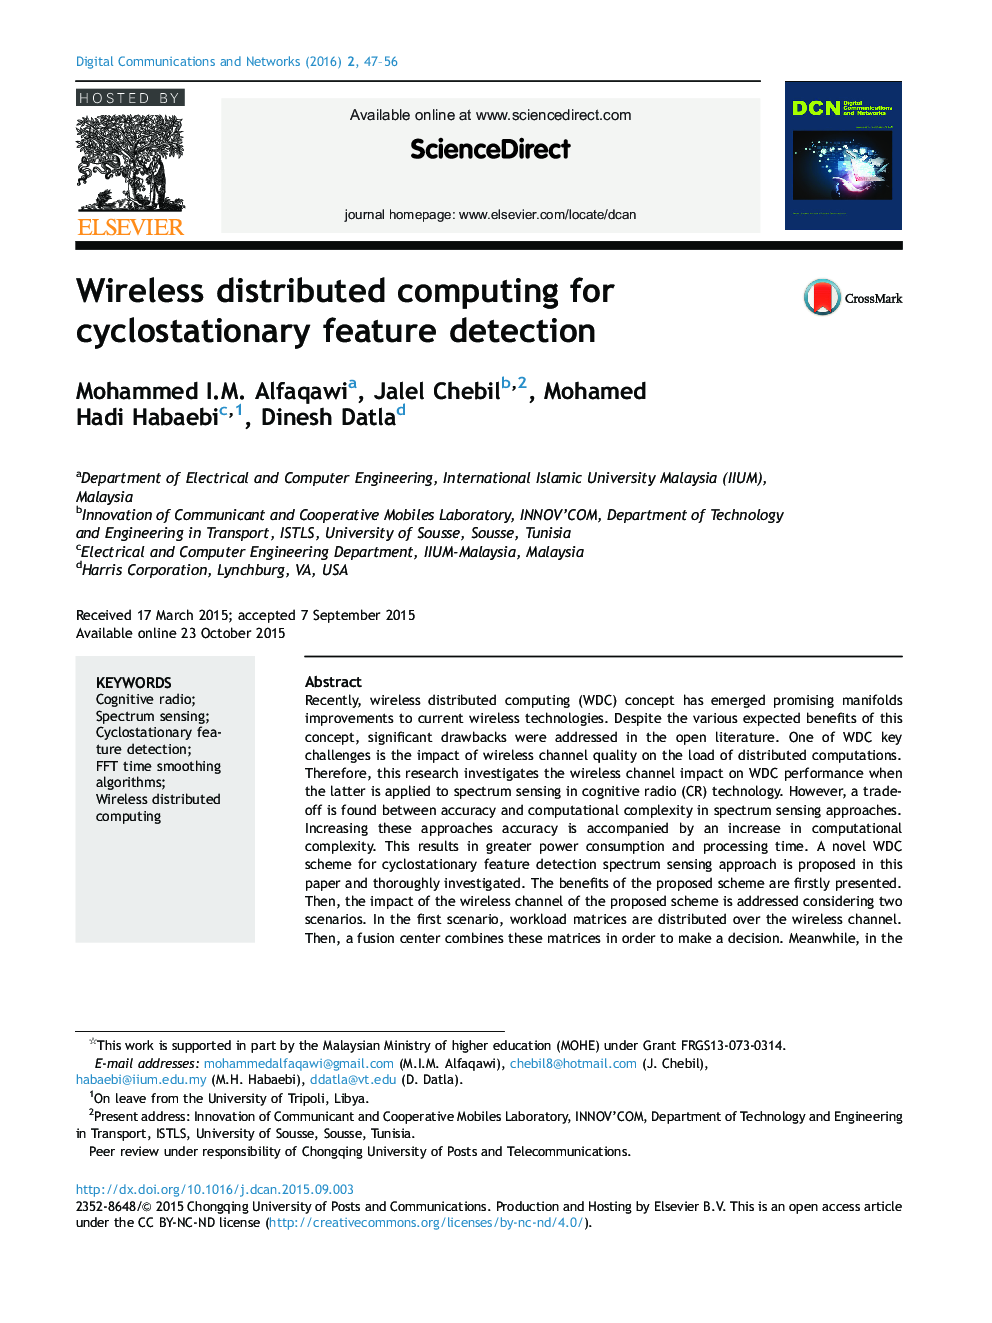 Wireless distributed computing for cyclostationary feature detection 